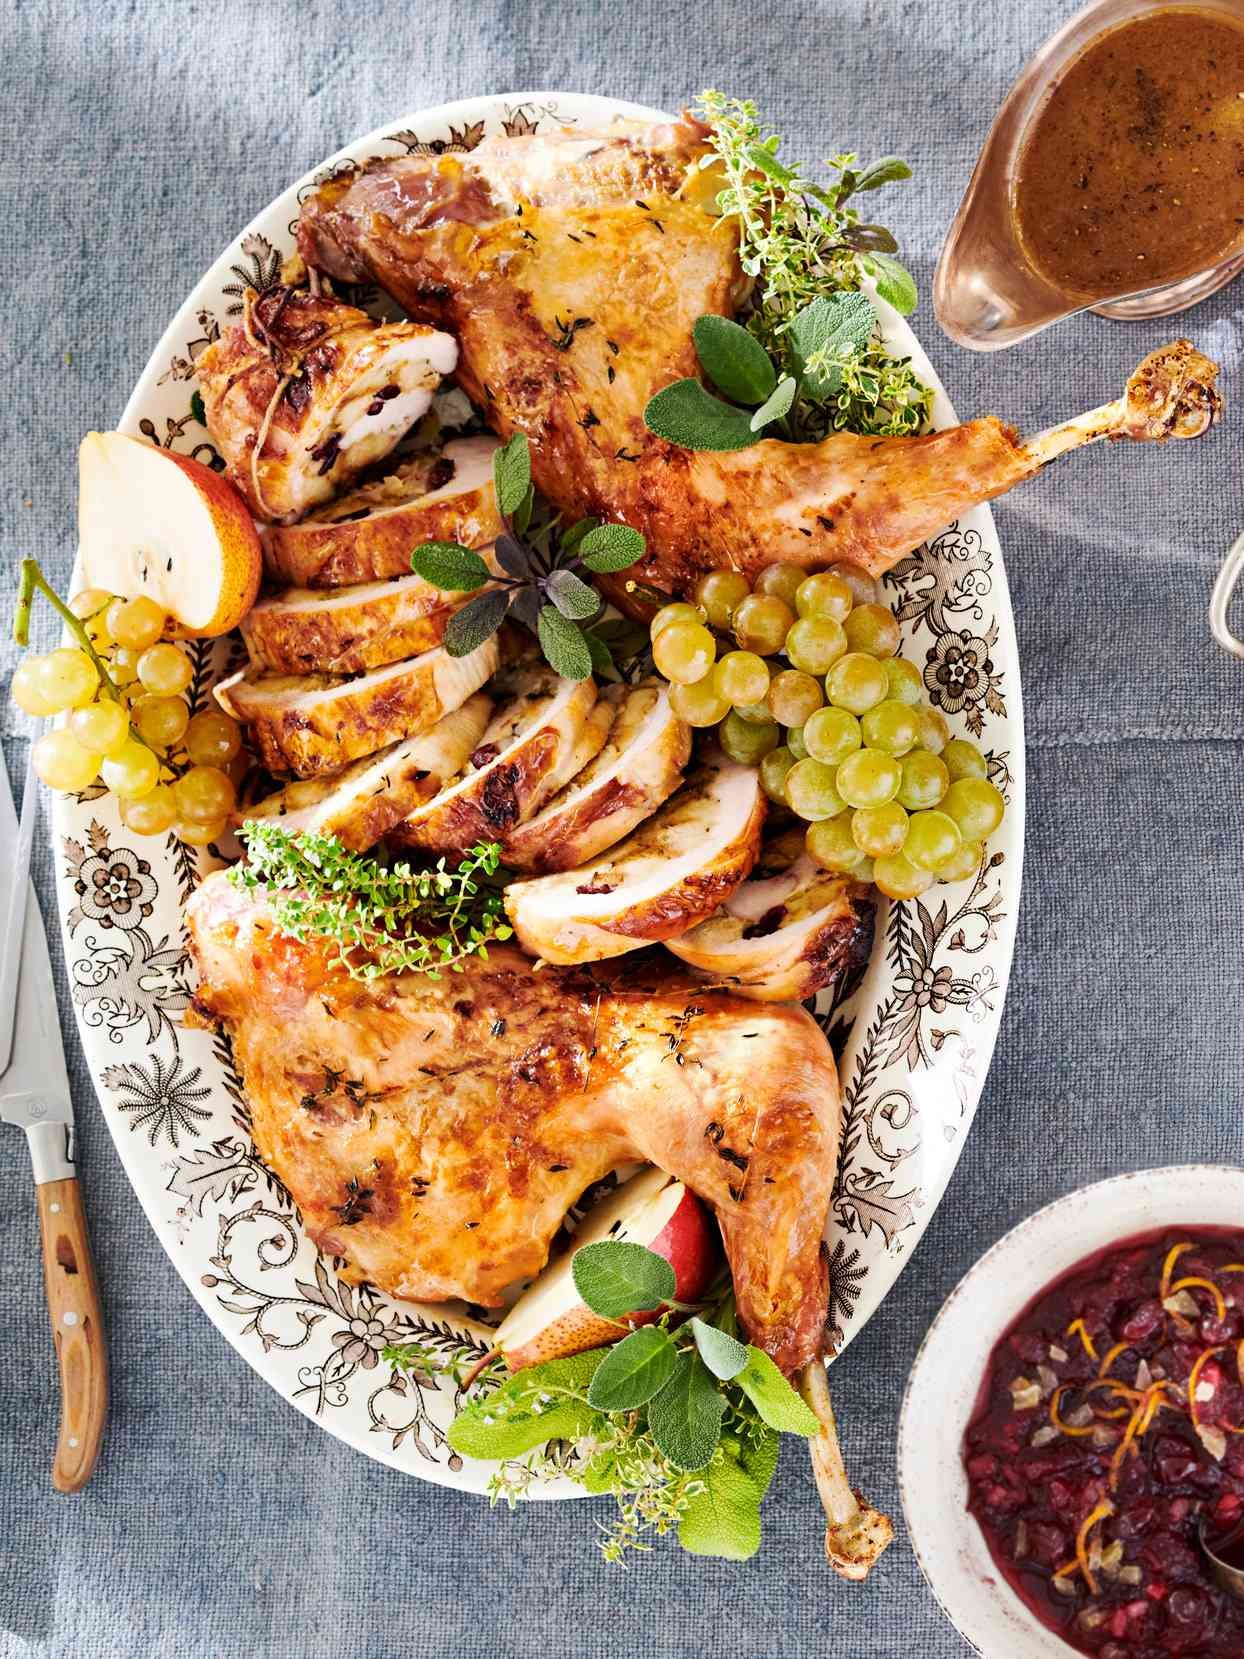 Our Smart, Streamlined Thanksgiving Menu Is the Feast You Need to Make This Year